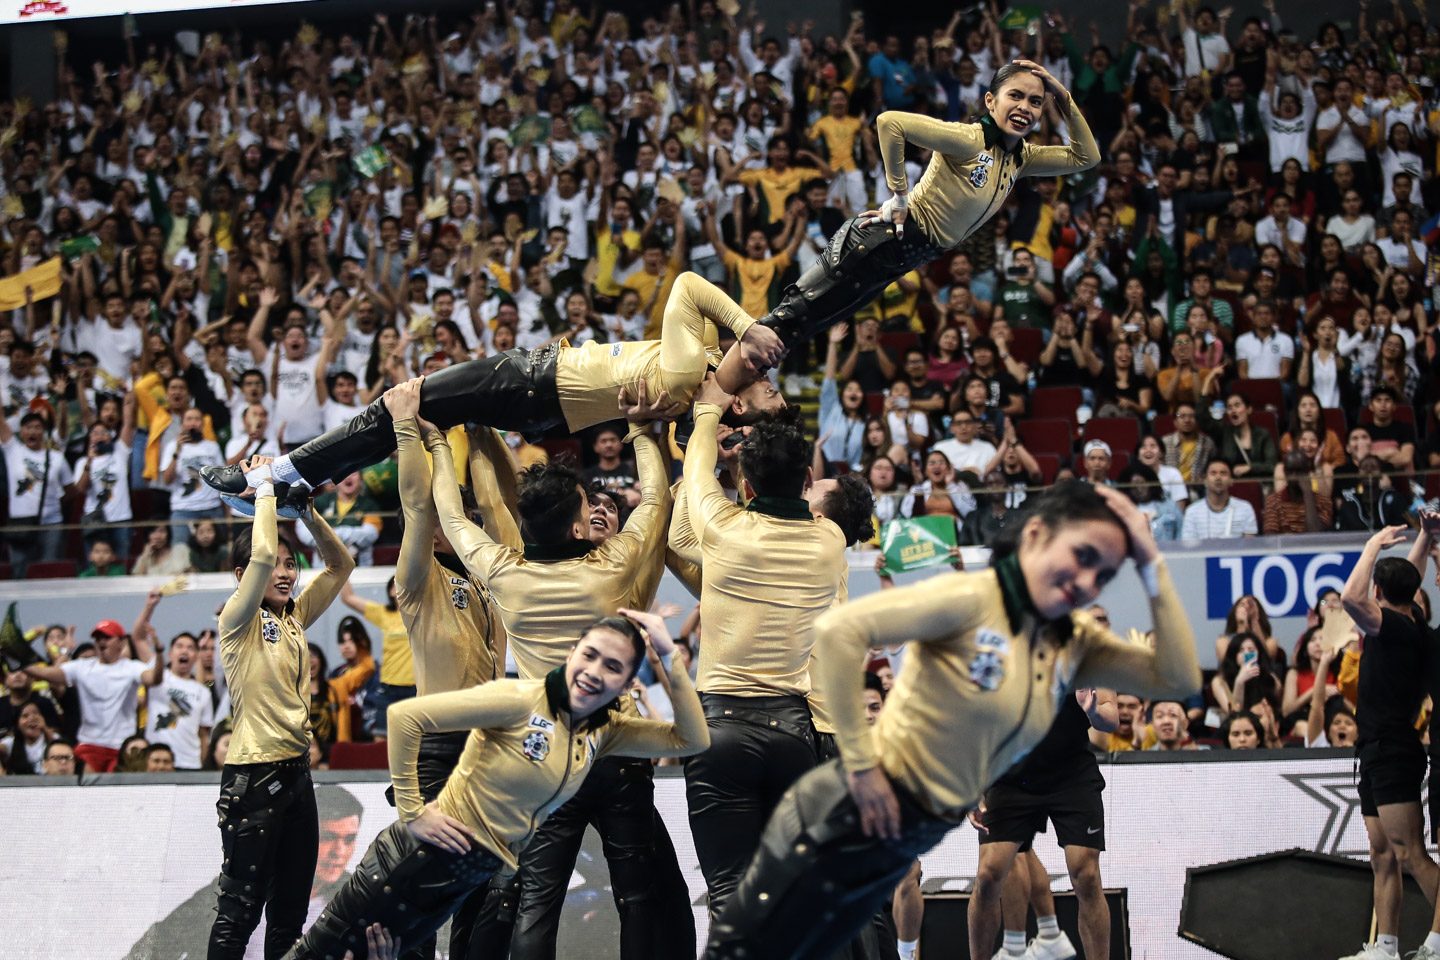 TRIBUTE. The FEU Cheering Squad brings its Michael Jackson-inspired routine to another level to captivate the audience. Photo by Josh Albelda/Rappler   